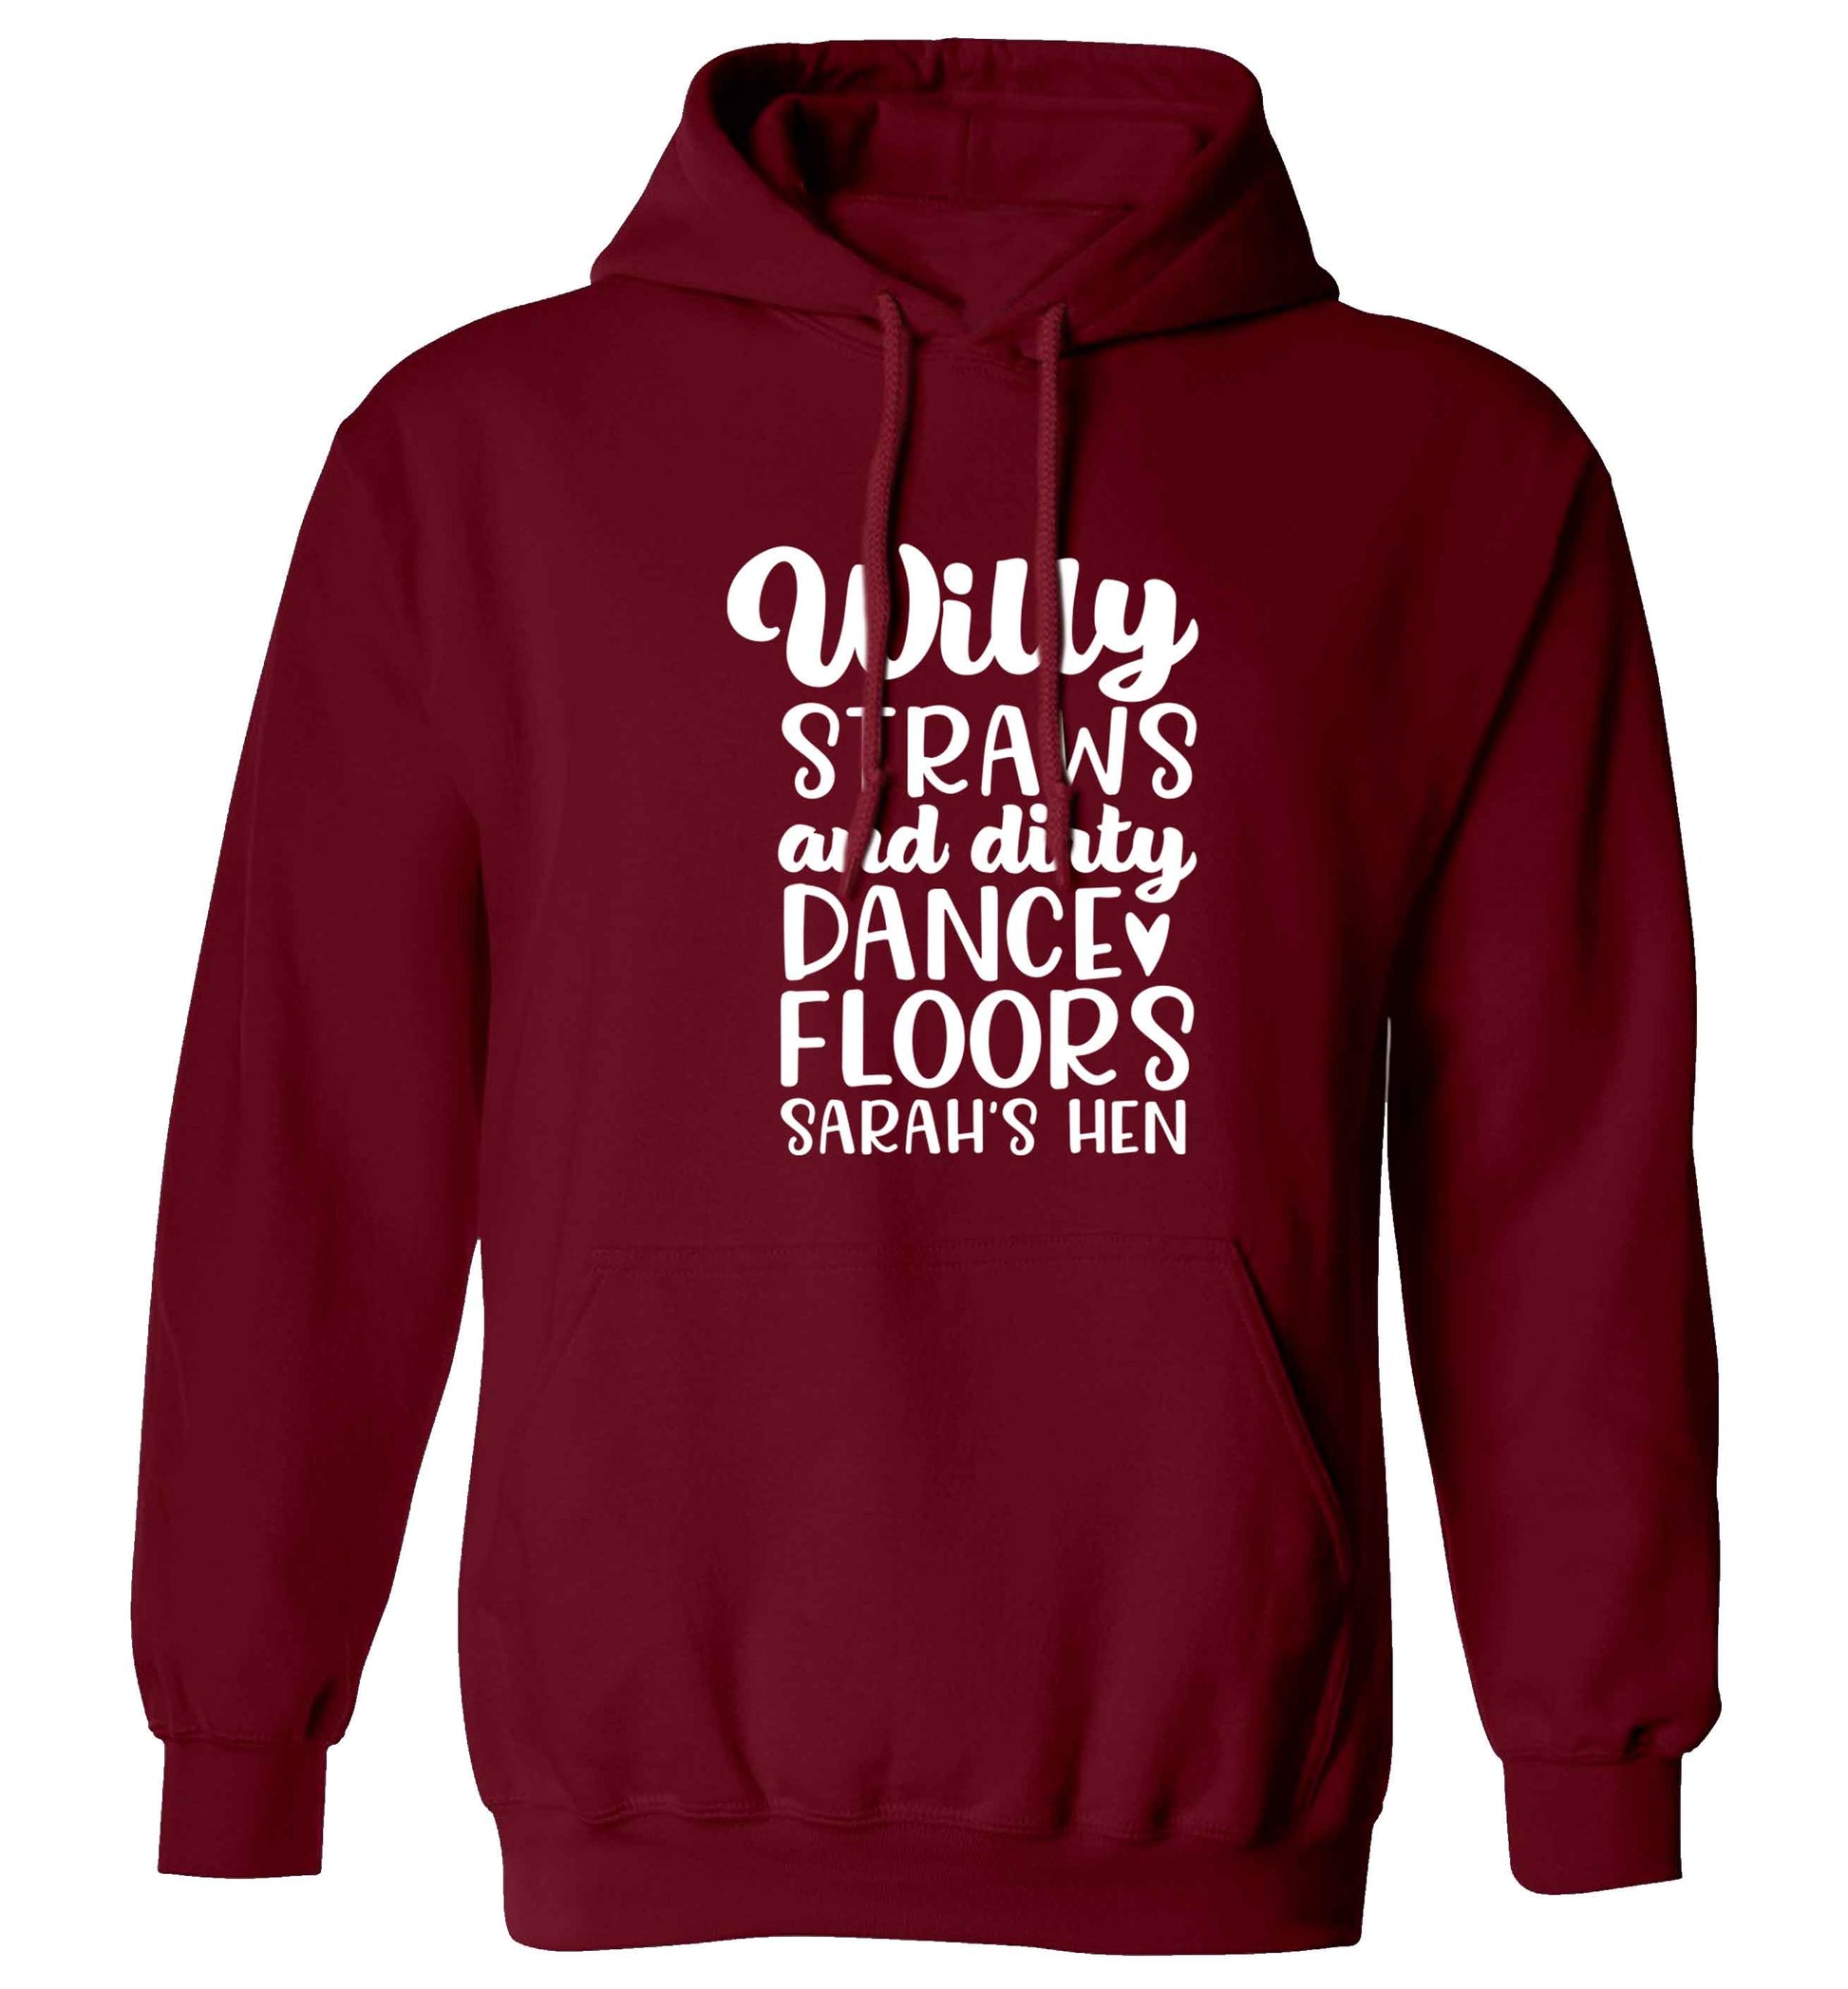 Willy straws and dirty dance floors adults unisex maroon hoodie 2XL